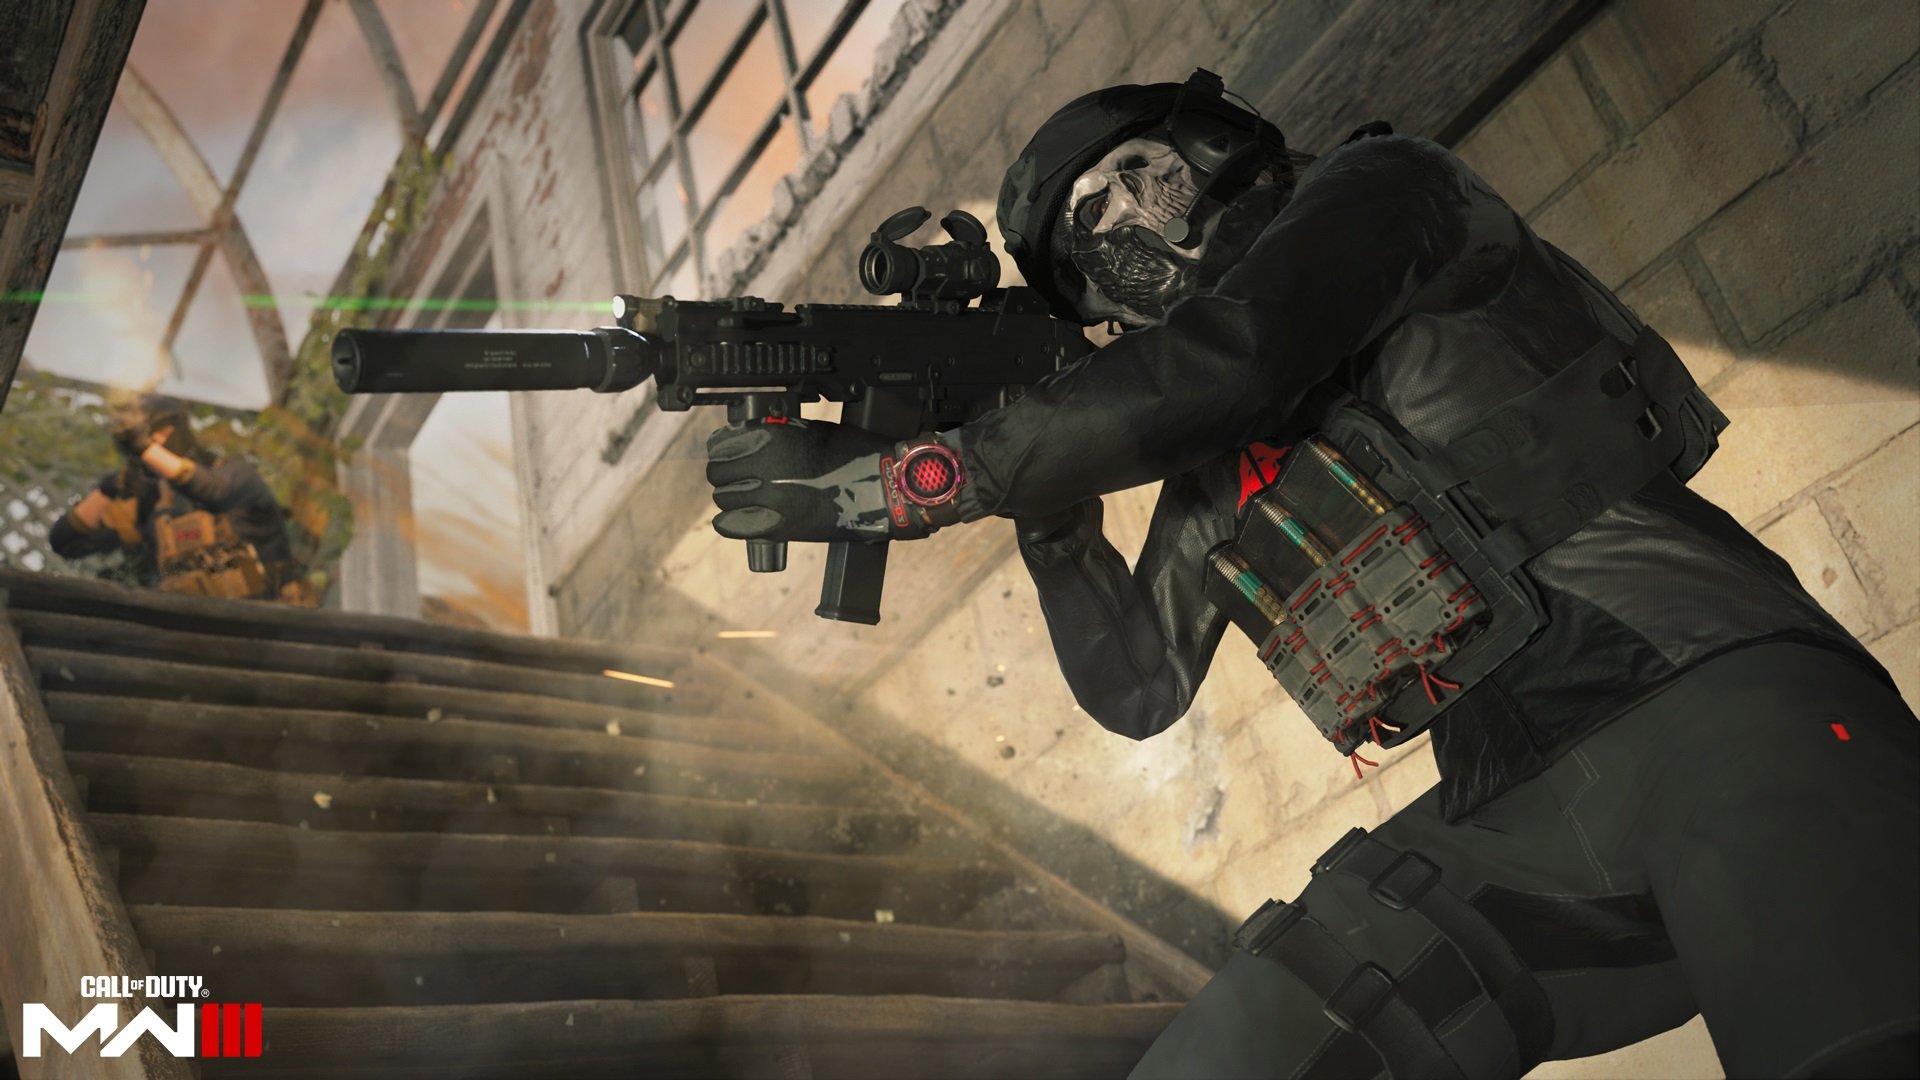 Early Access Available to Call of Duty Modern Warfare III Game